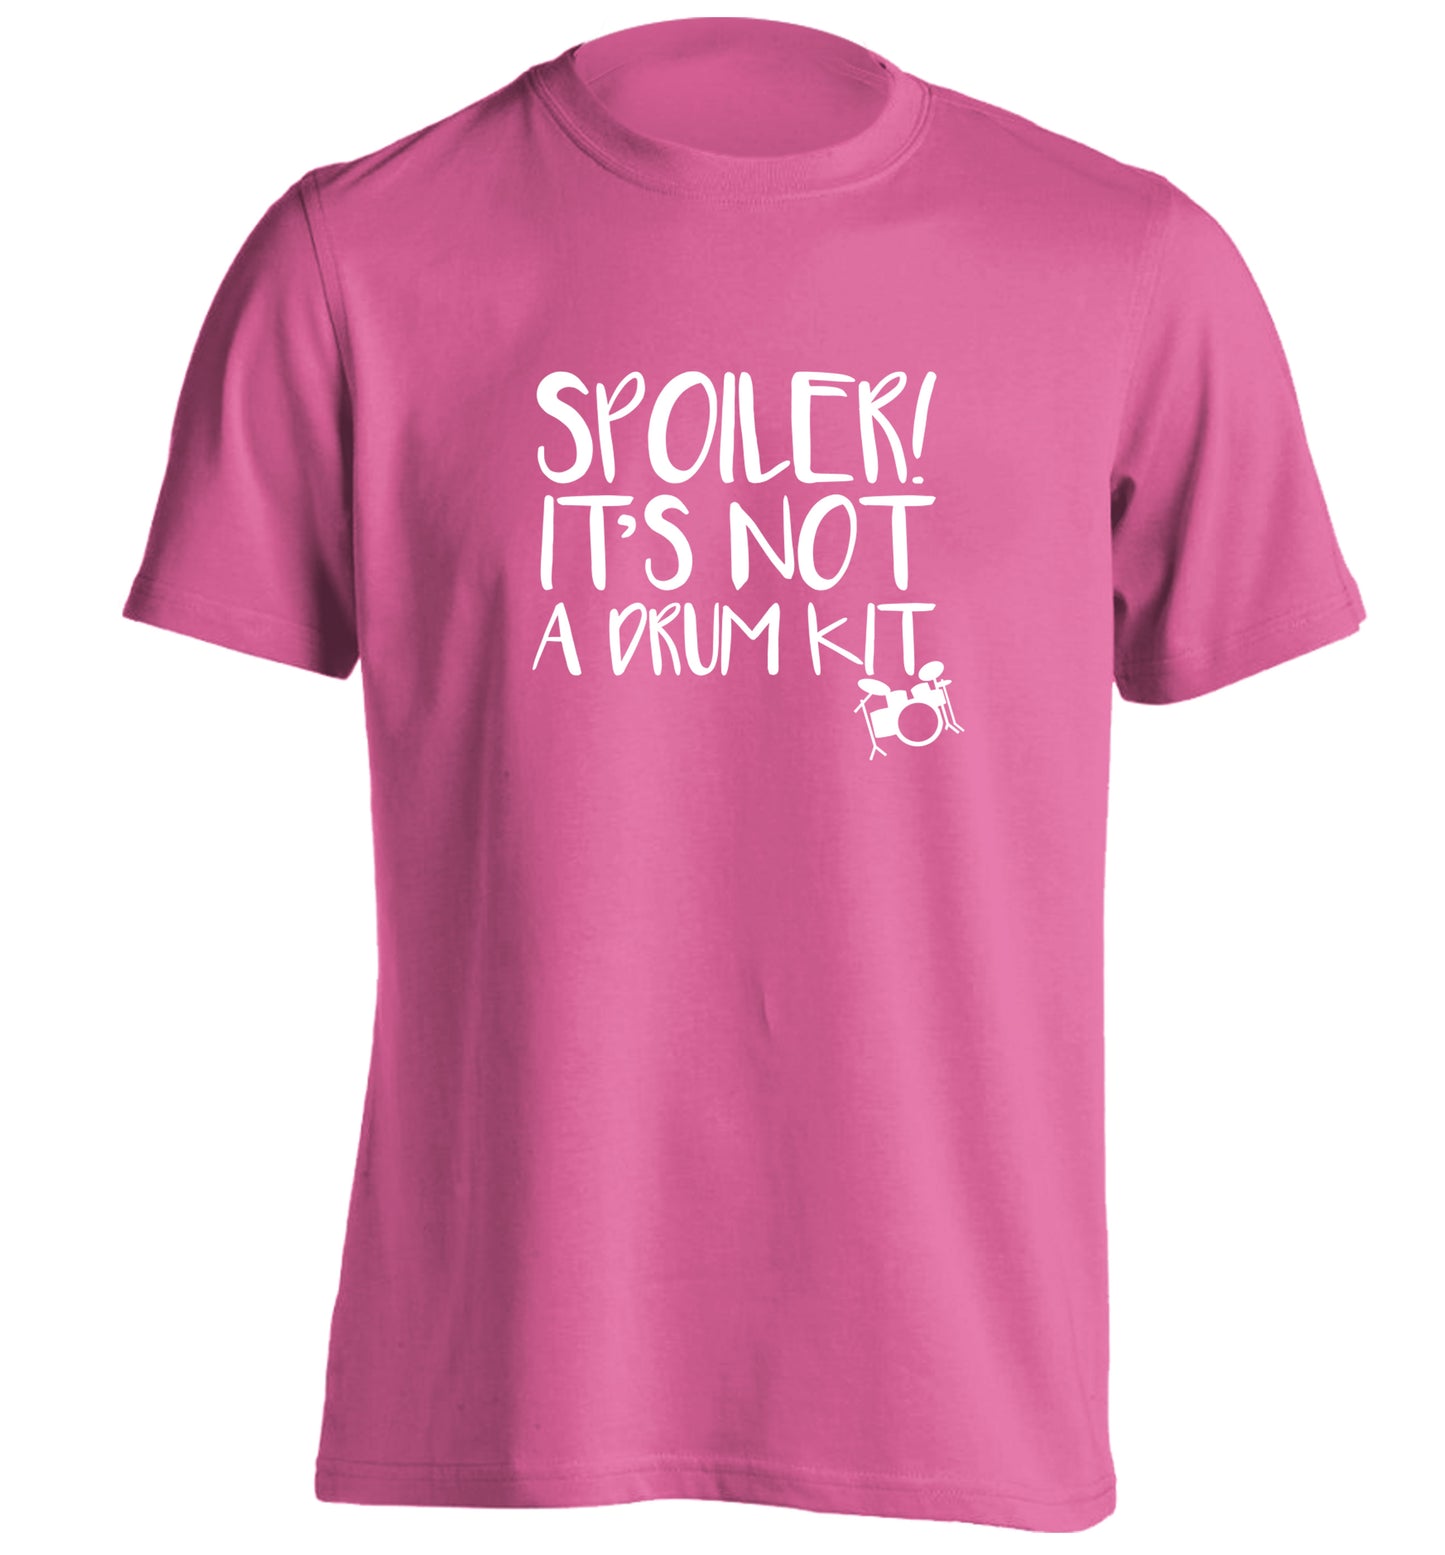 Spoiler it's not a drum kit adults unisex pink Tshirt 2XL